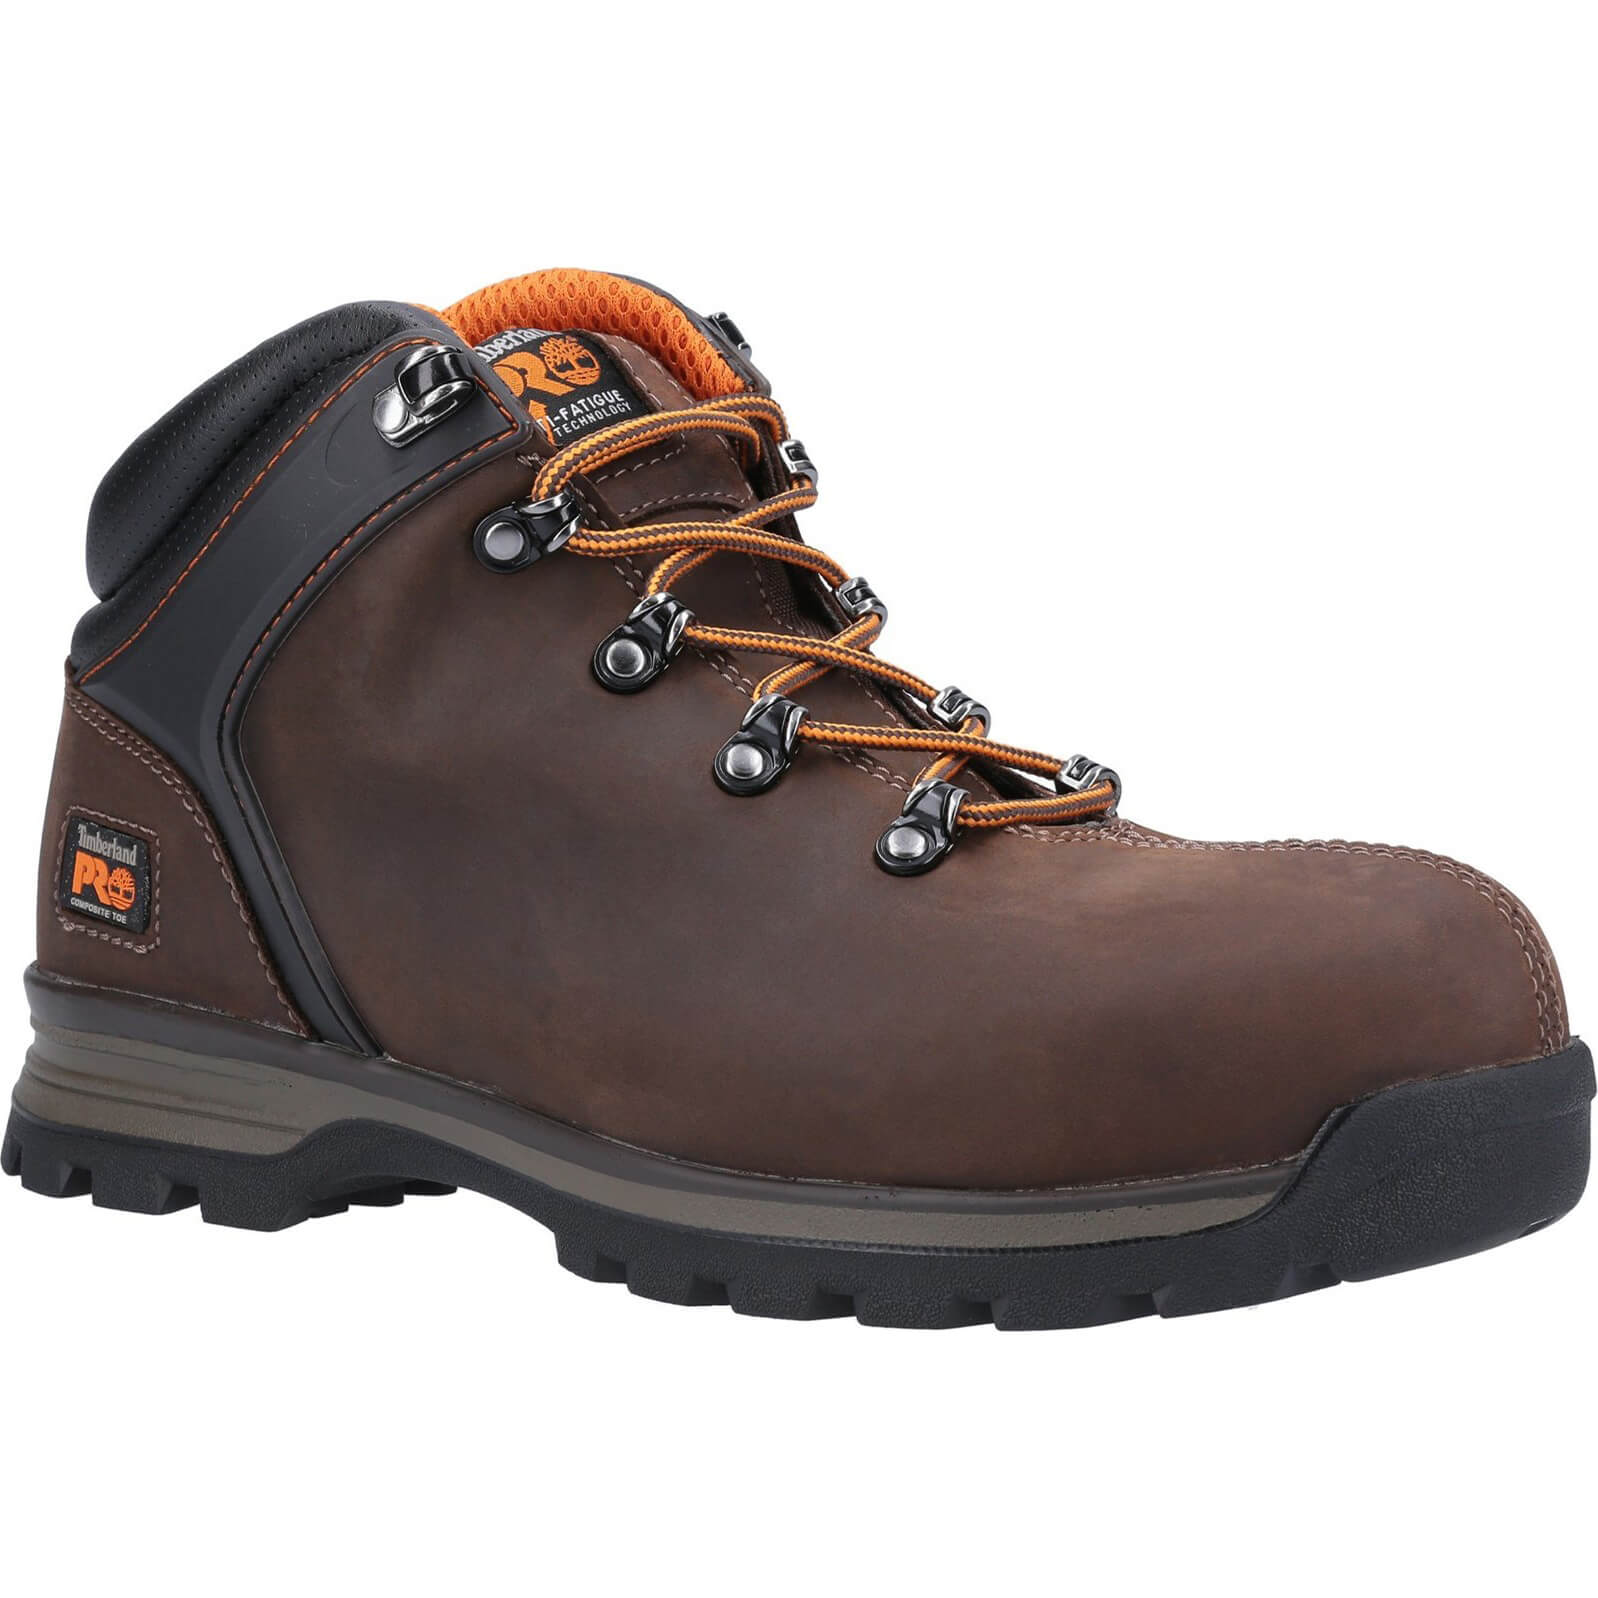 Image of Timberland Pro Splitrock XT Composite Safety Toe Work Boot Brown Size 7